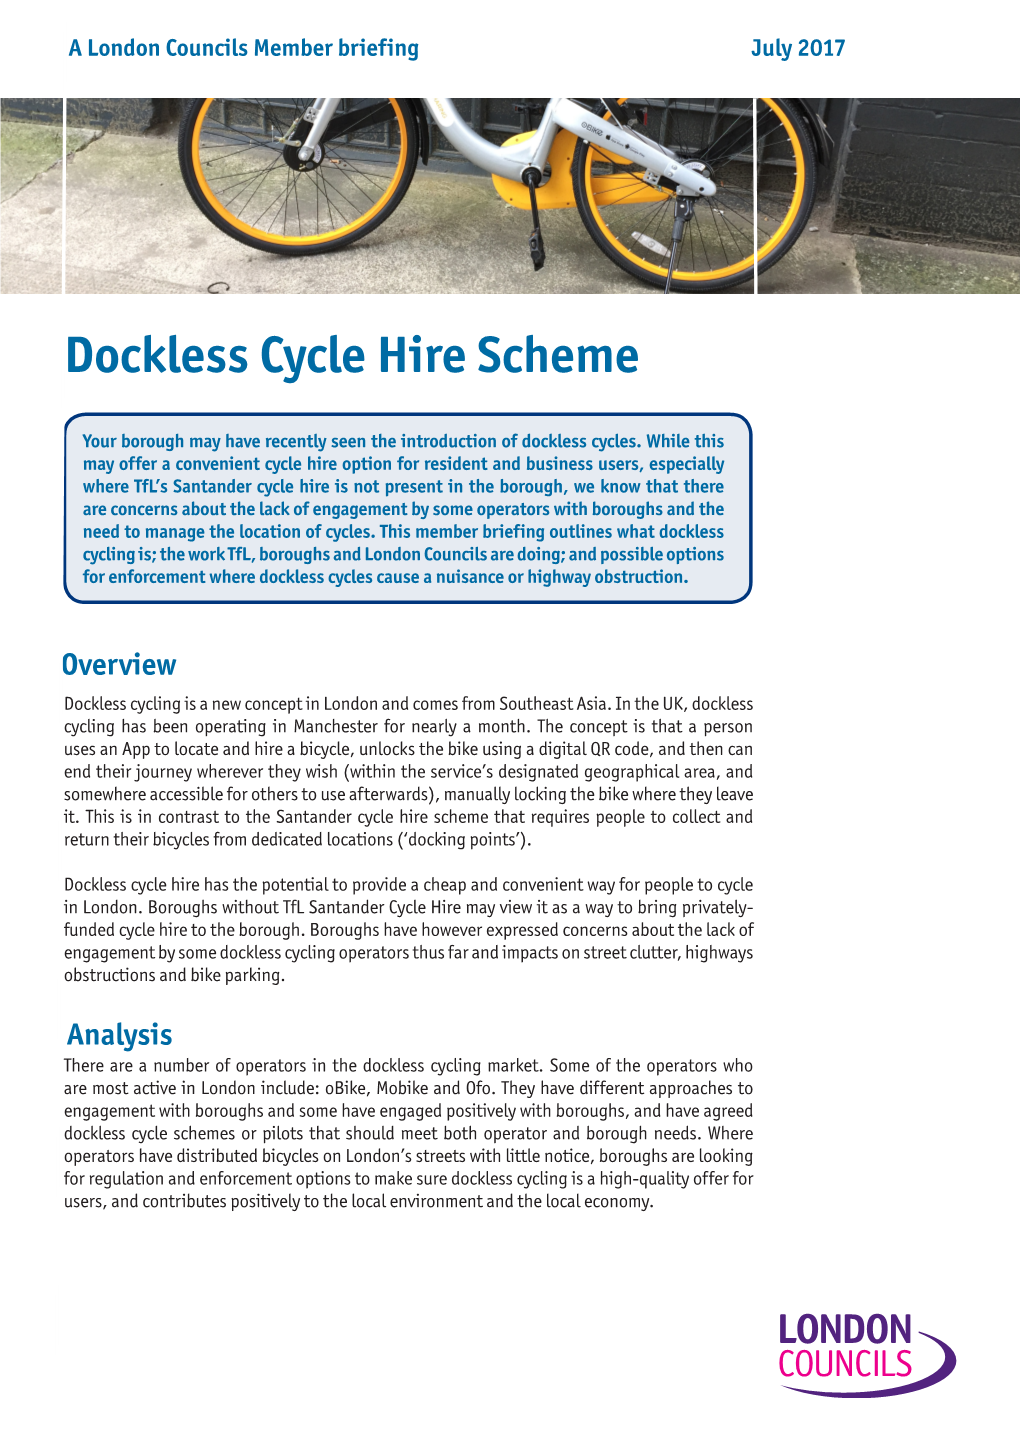 Dockless Cycle Hire Scheme